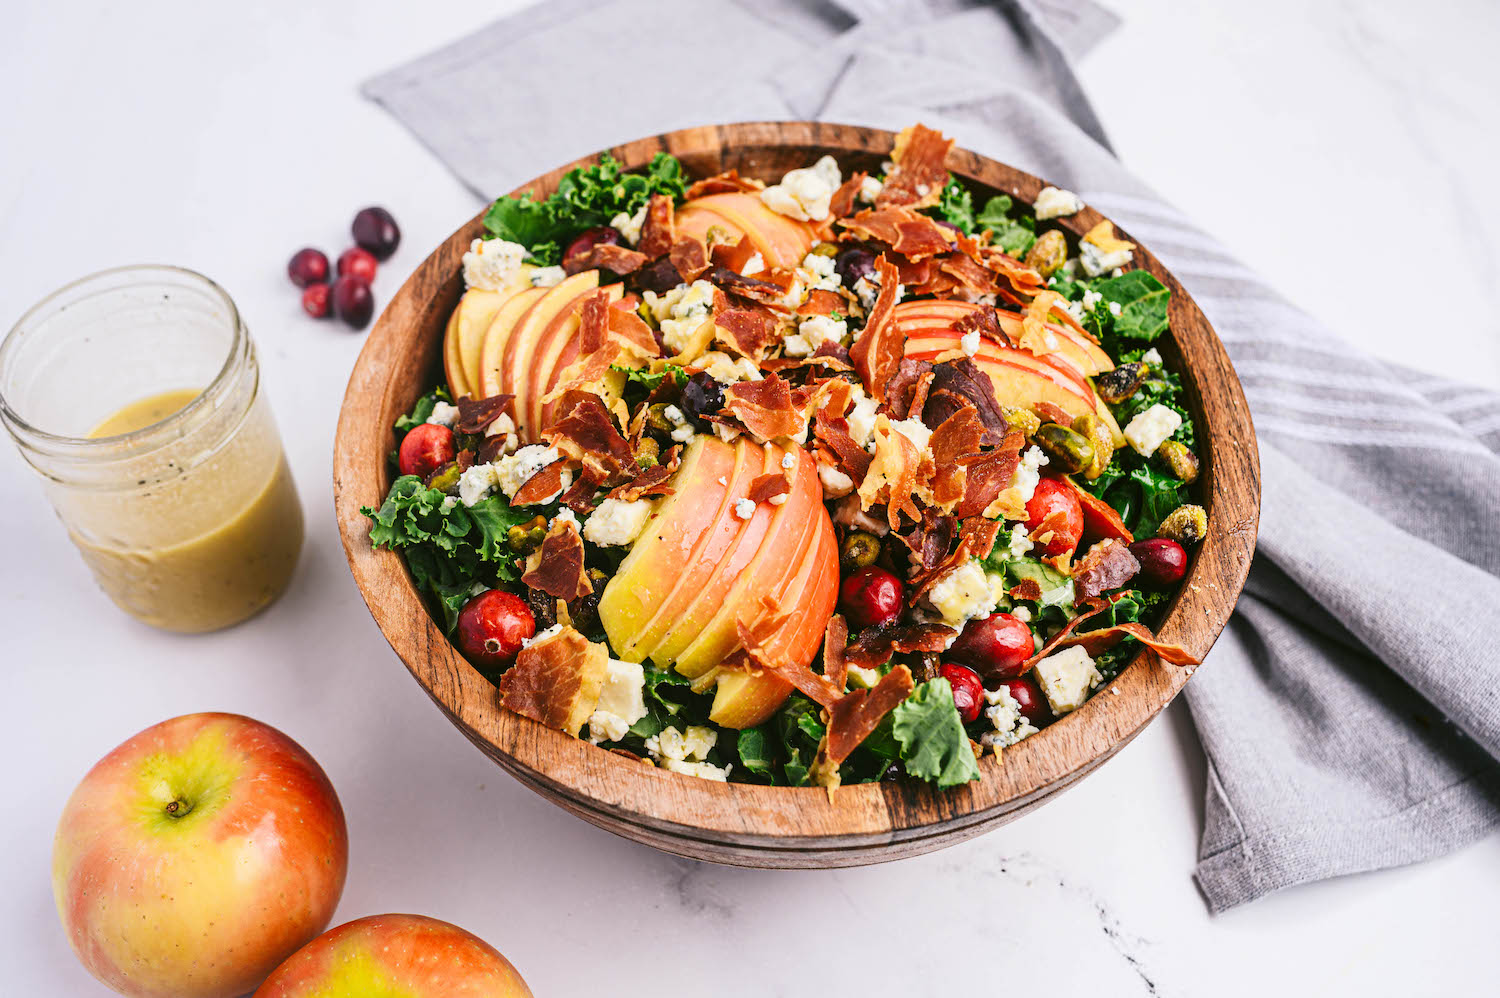 Apple, Cranberry, and Kale Salad